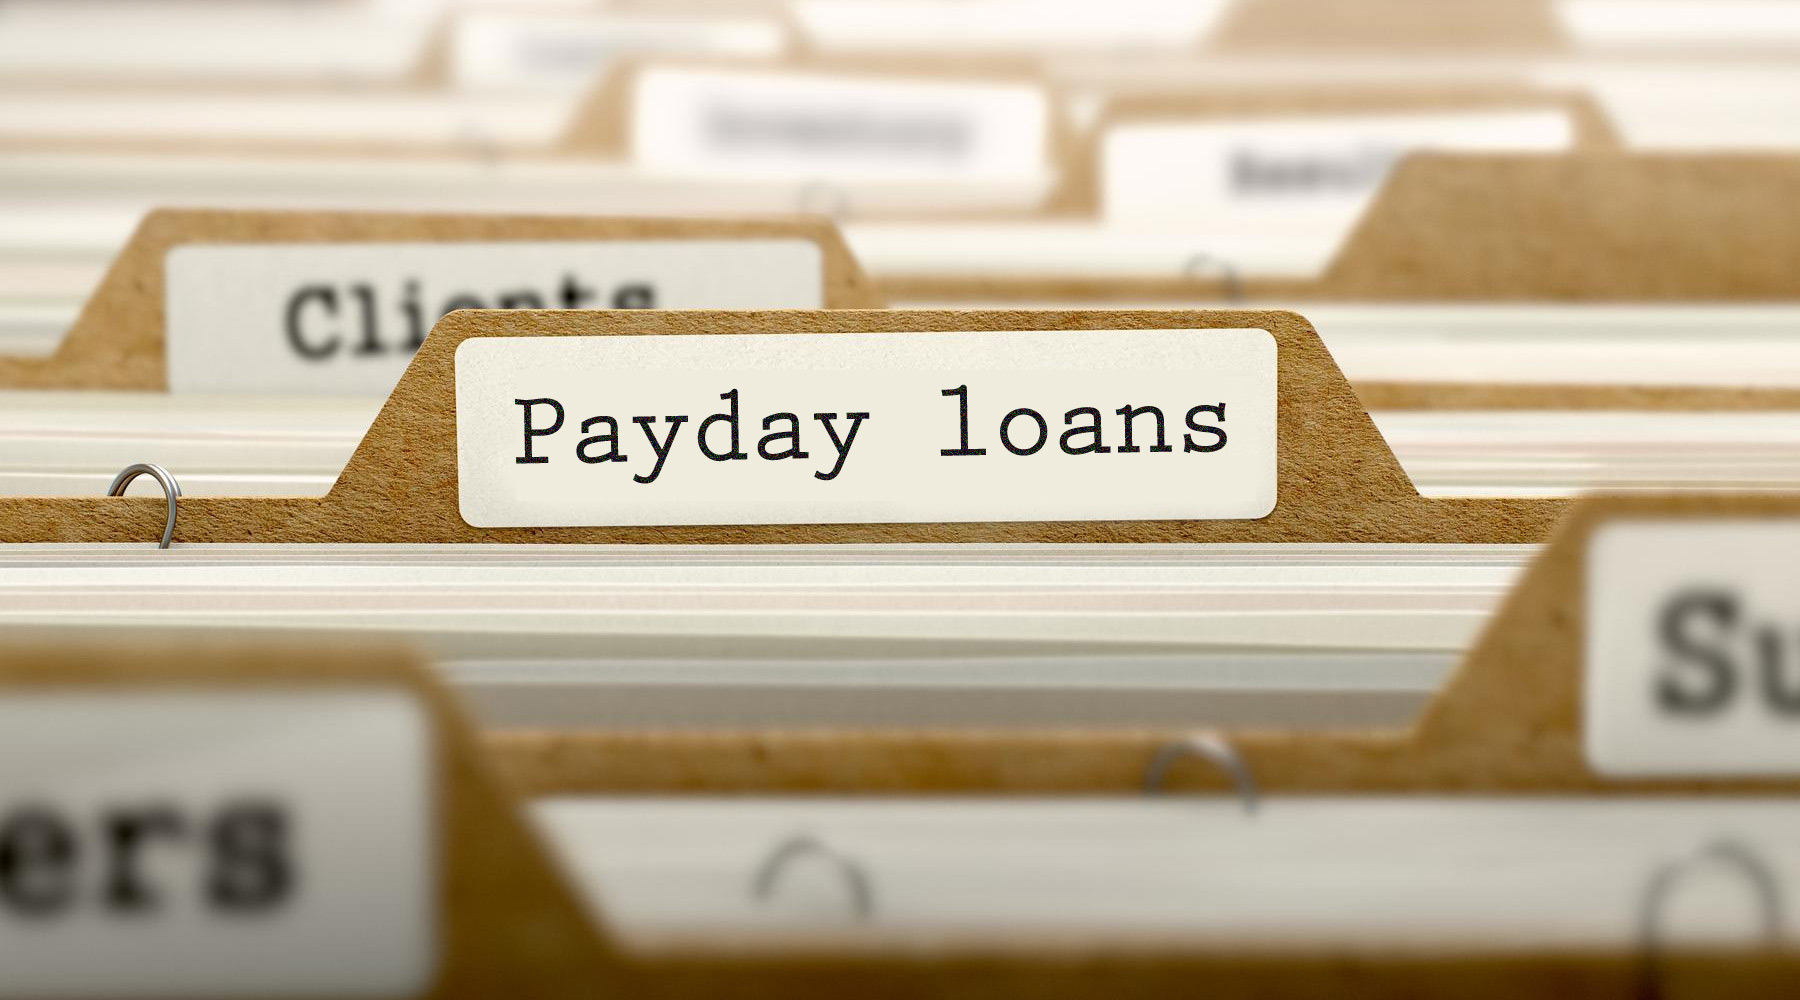 Puzzled By Pay Day Loans? Get Help Here!